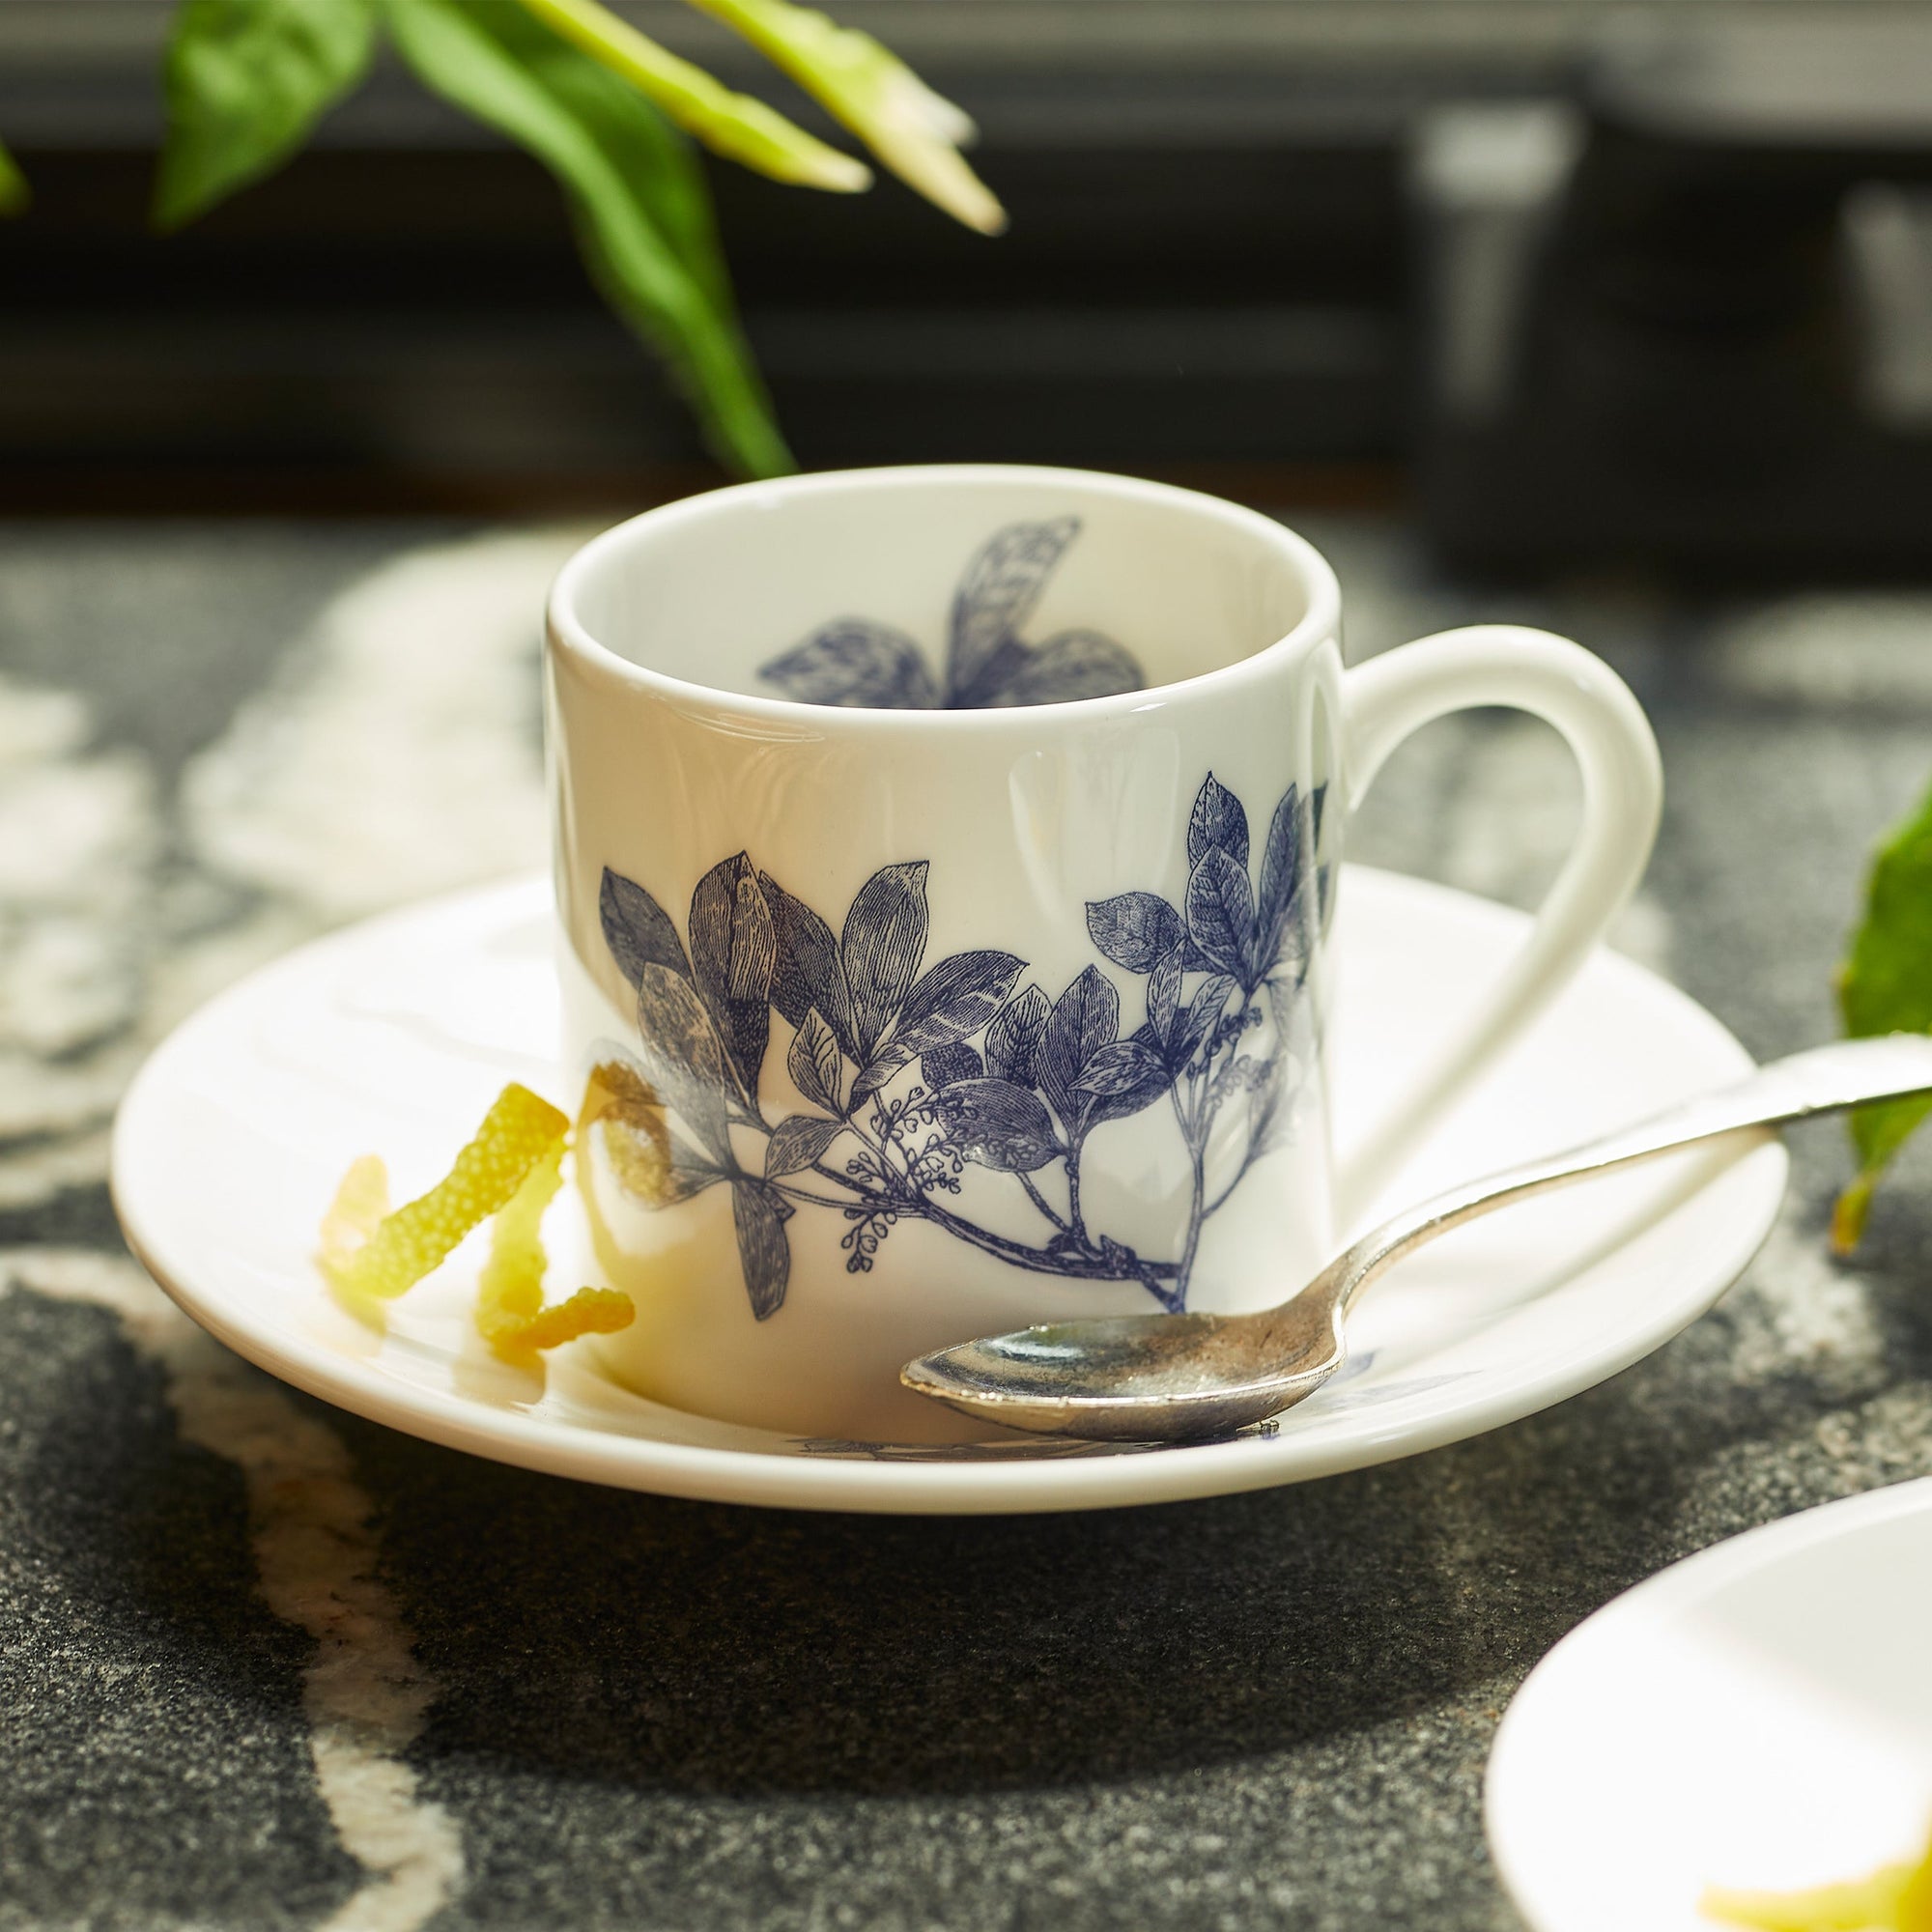 Two white ceramic cups with matching saucers, each adorned with blue floral designs, are perfect additions to any Blue and White Dinnerware collection. The Arbor Espresso Cups & Saucers, Set of 2 by Caskata are microwave-safe pieces that offer both beauty and practicality for everyday use.